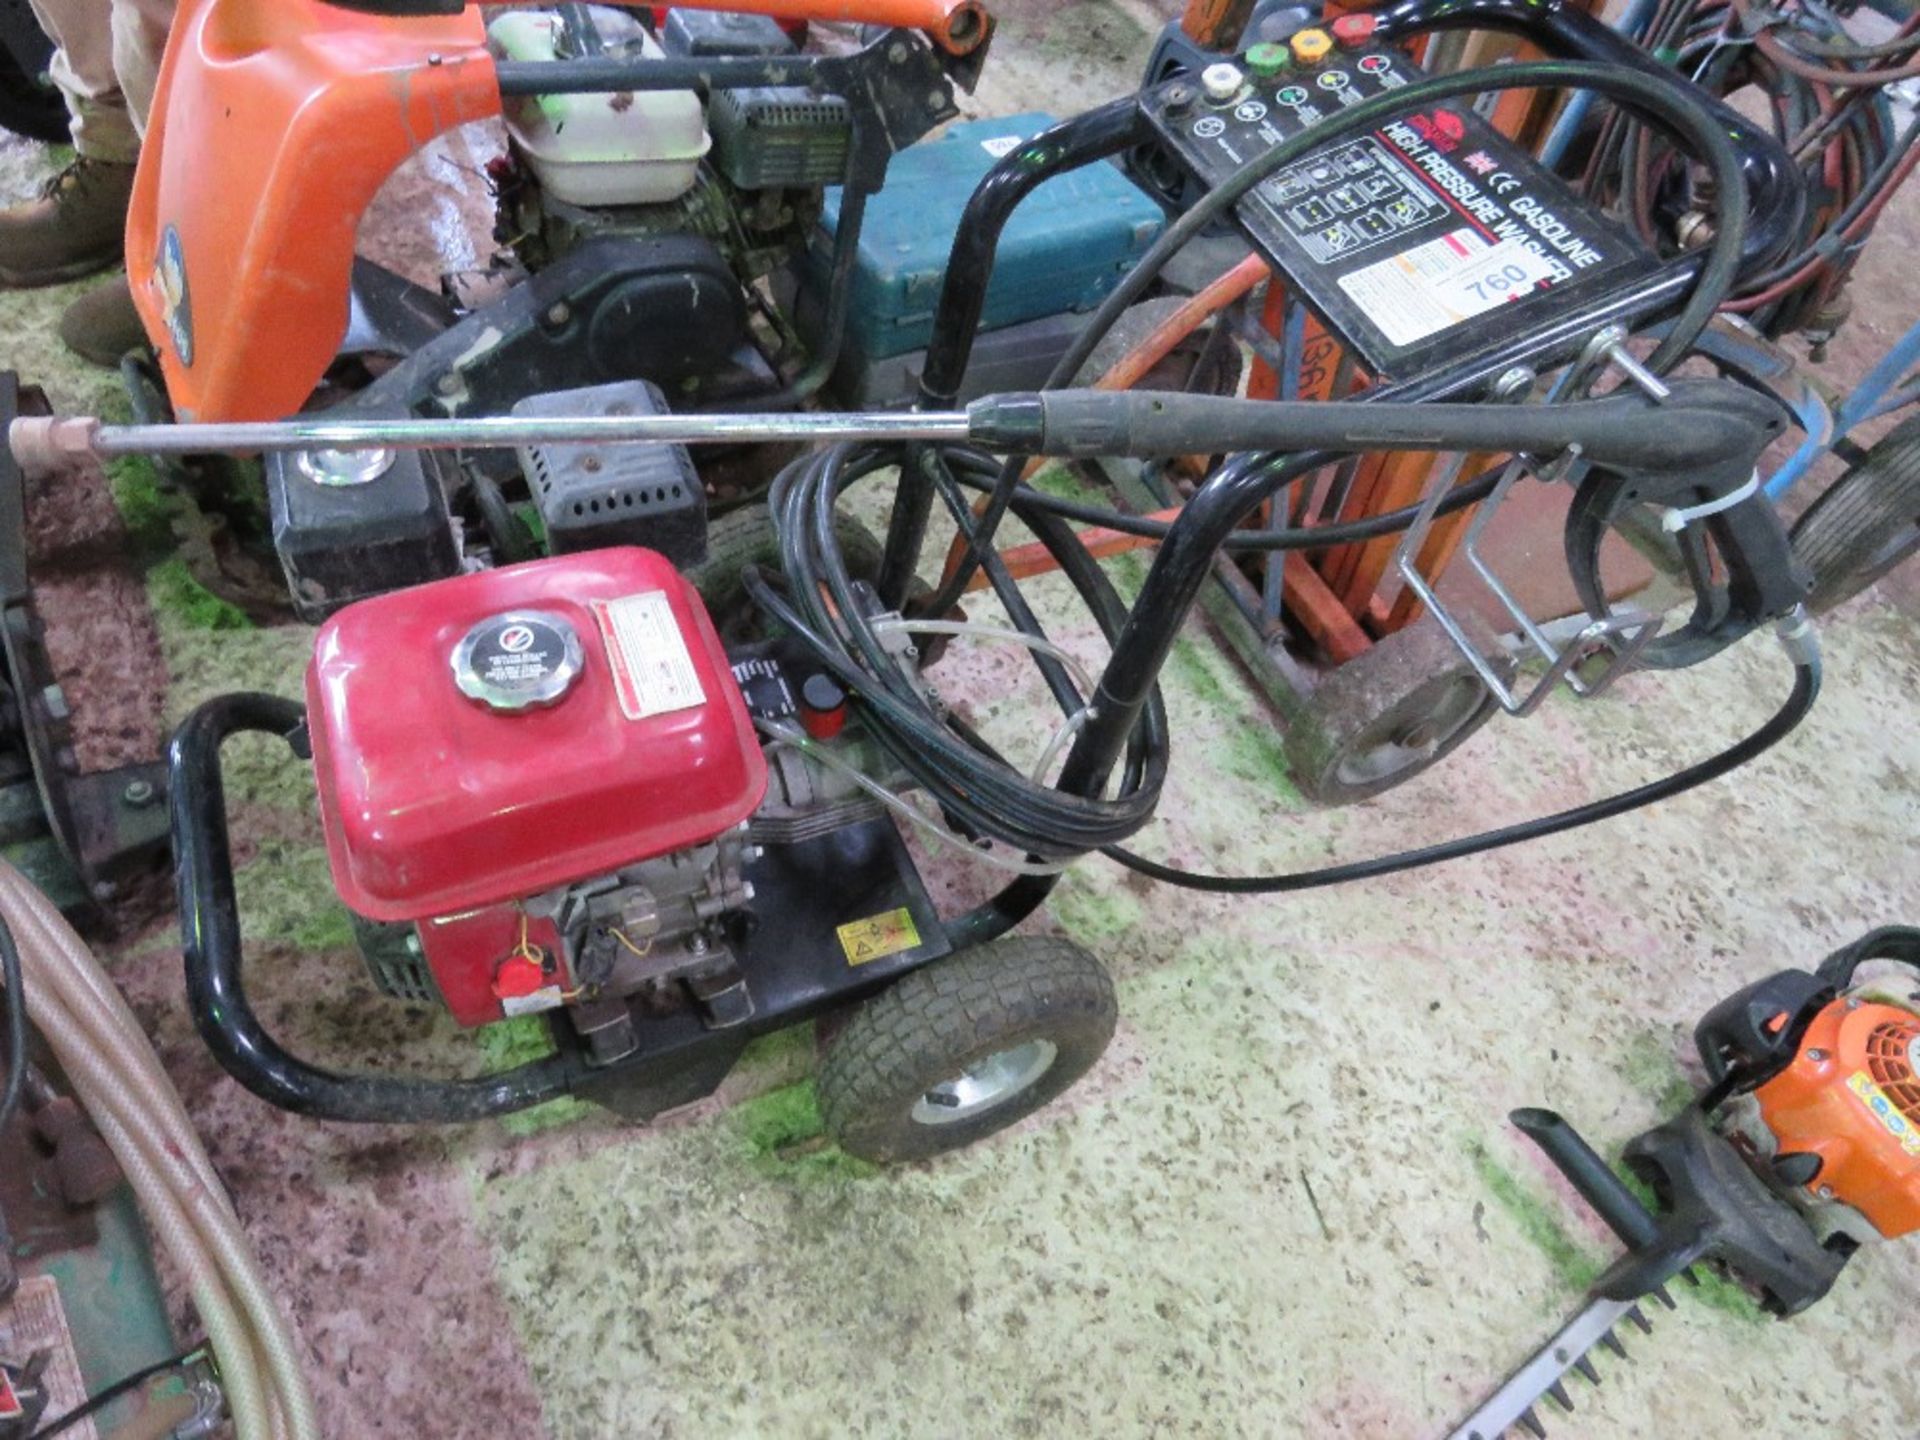 PETROL ENGINED PRESSURE WASHER.....THIS LOT IS SOLD UNDER THE AUCTIONEERS MARGIN SCHEME, THEREFORE N